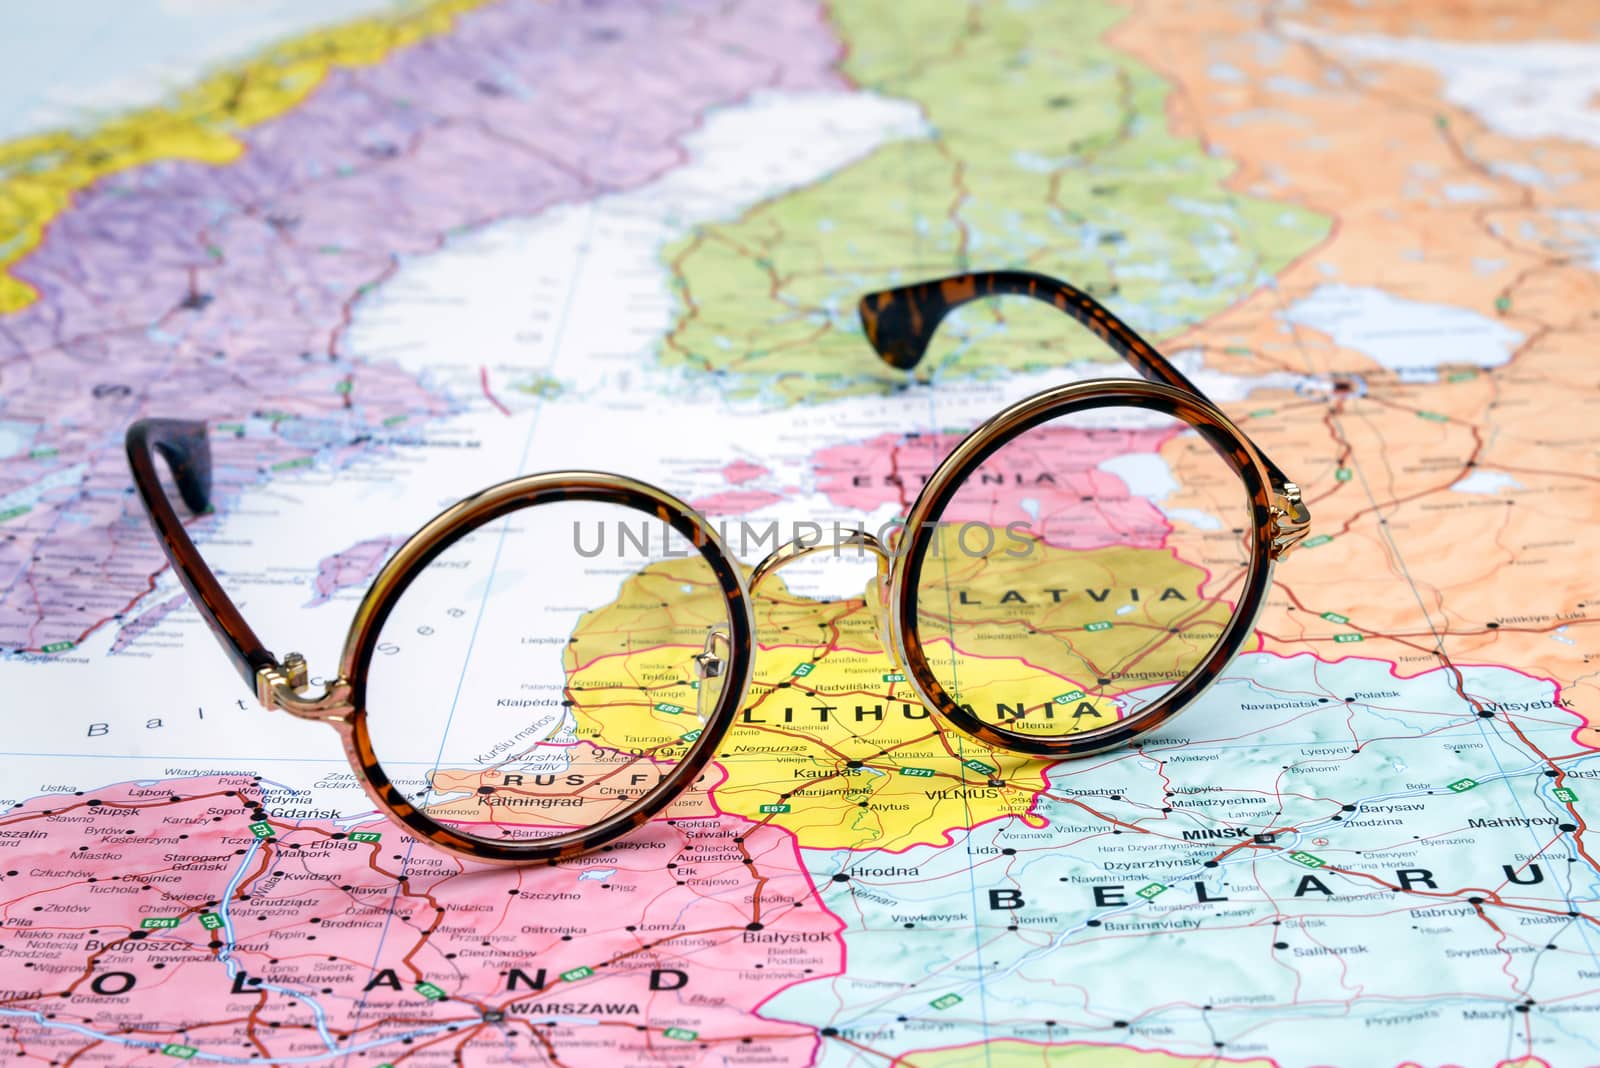 Glasses on a map of europe - Latvia by dk_photos